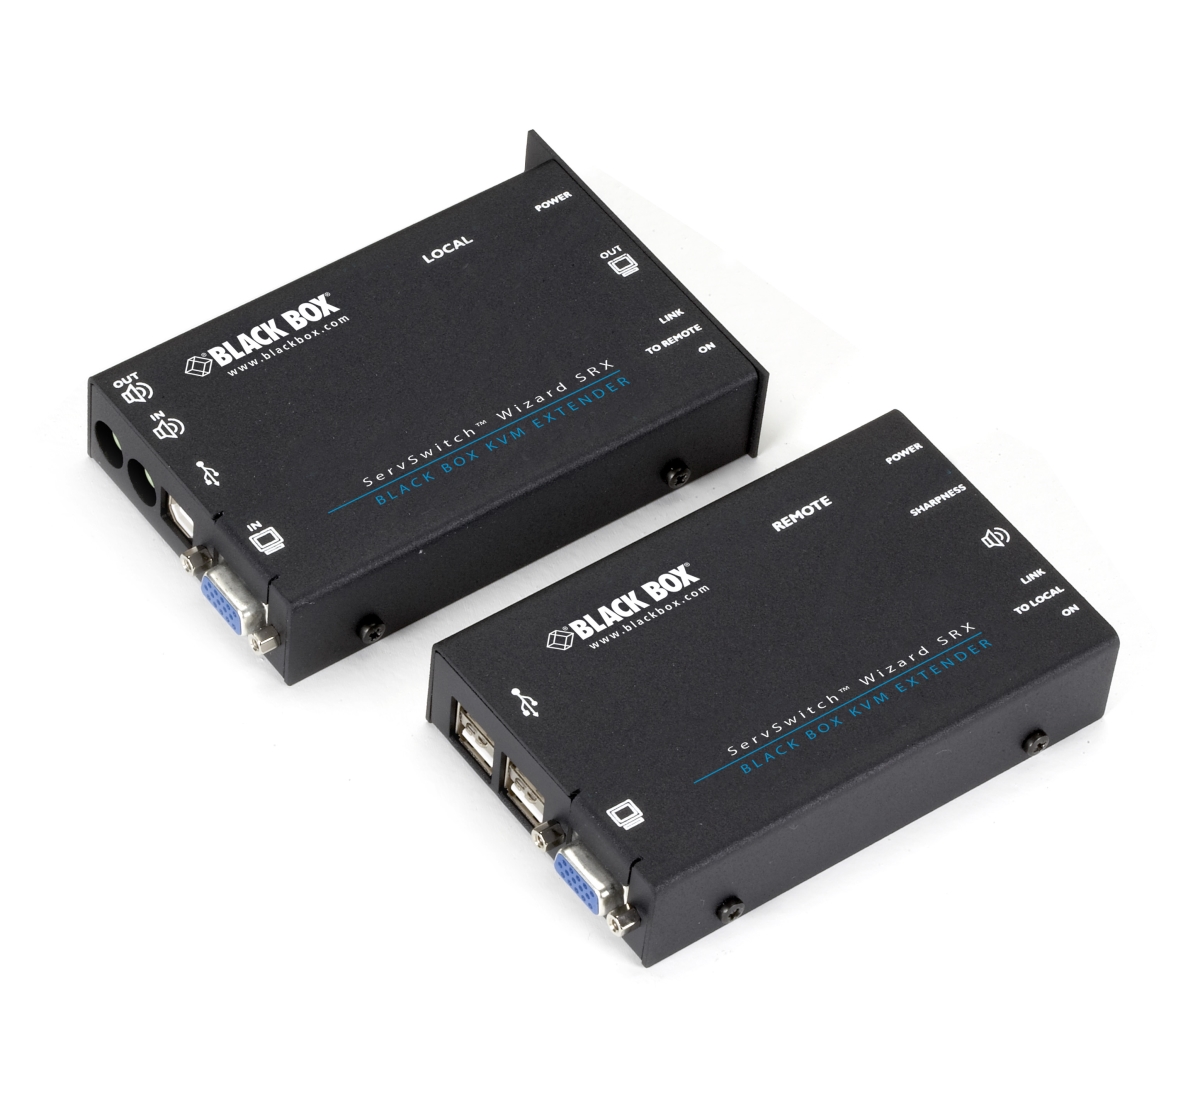 Picture of Blackbox ACU5051A 2.0 Audio Dual Access Servswitch Wizard Extender